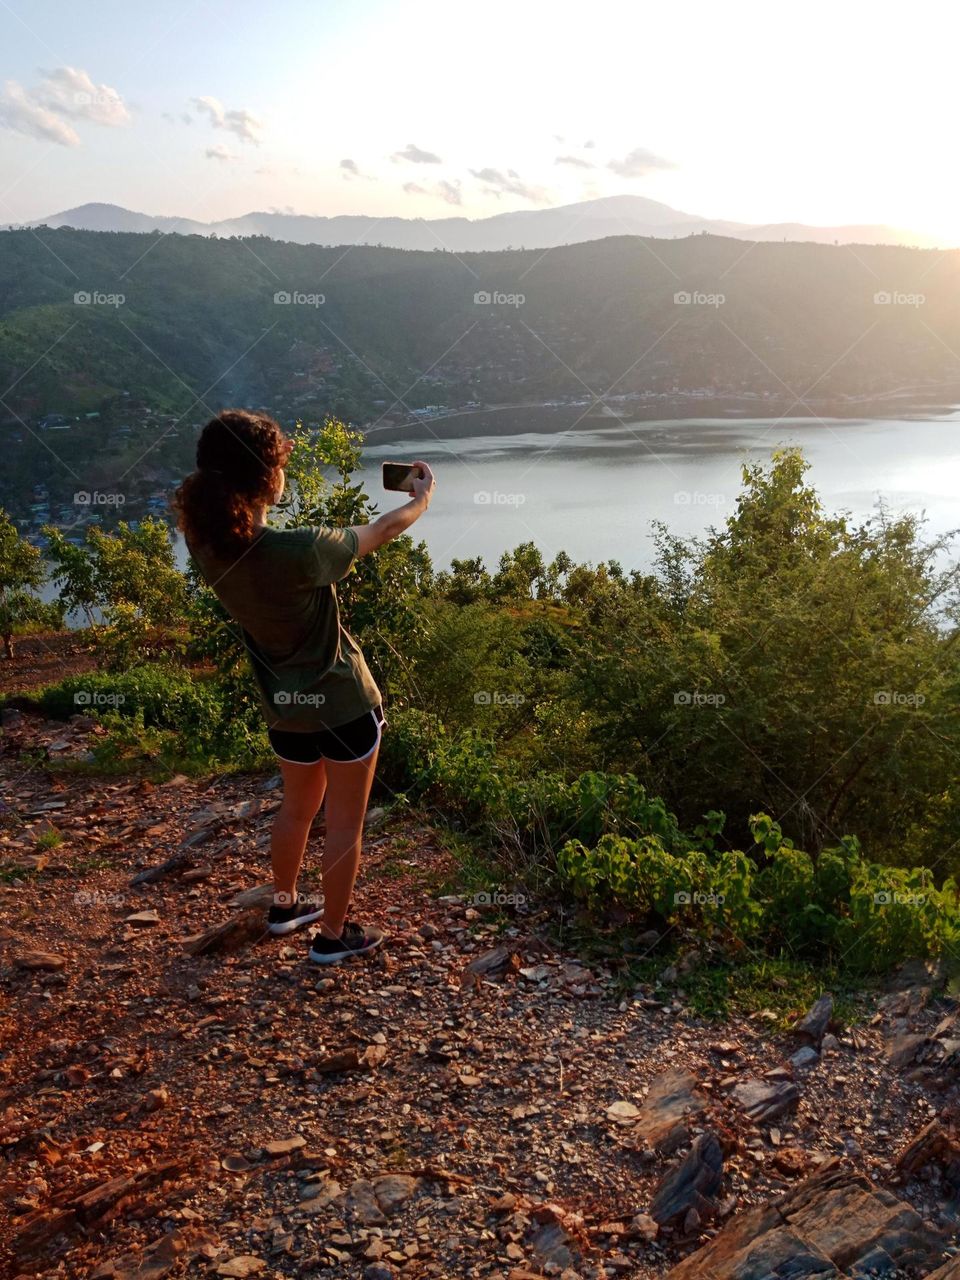 Capturing a sunset from a mountain view to the ocean